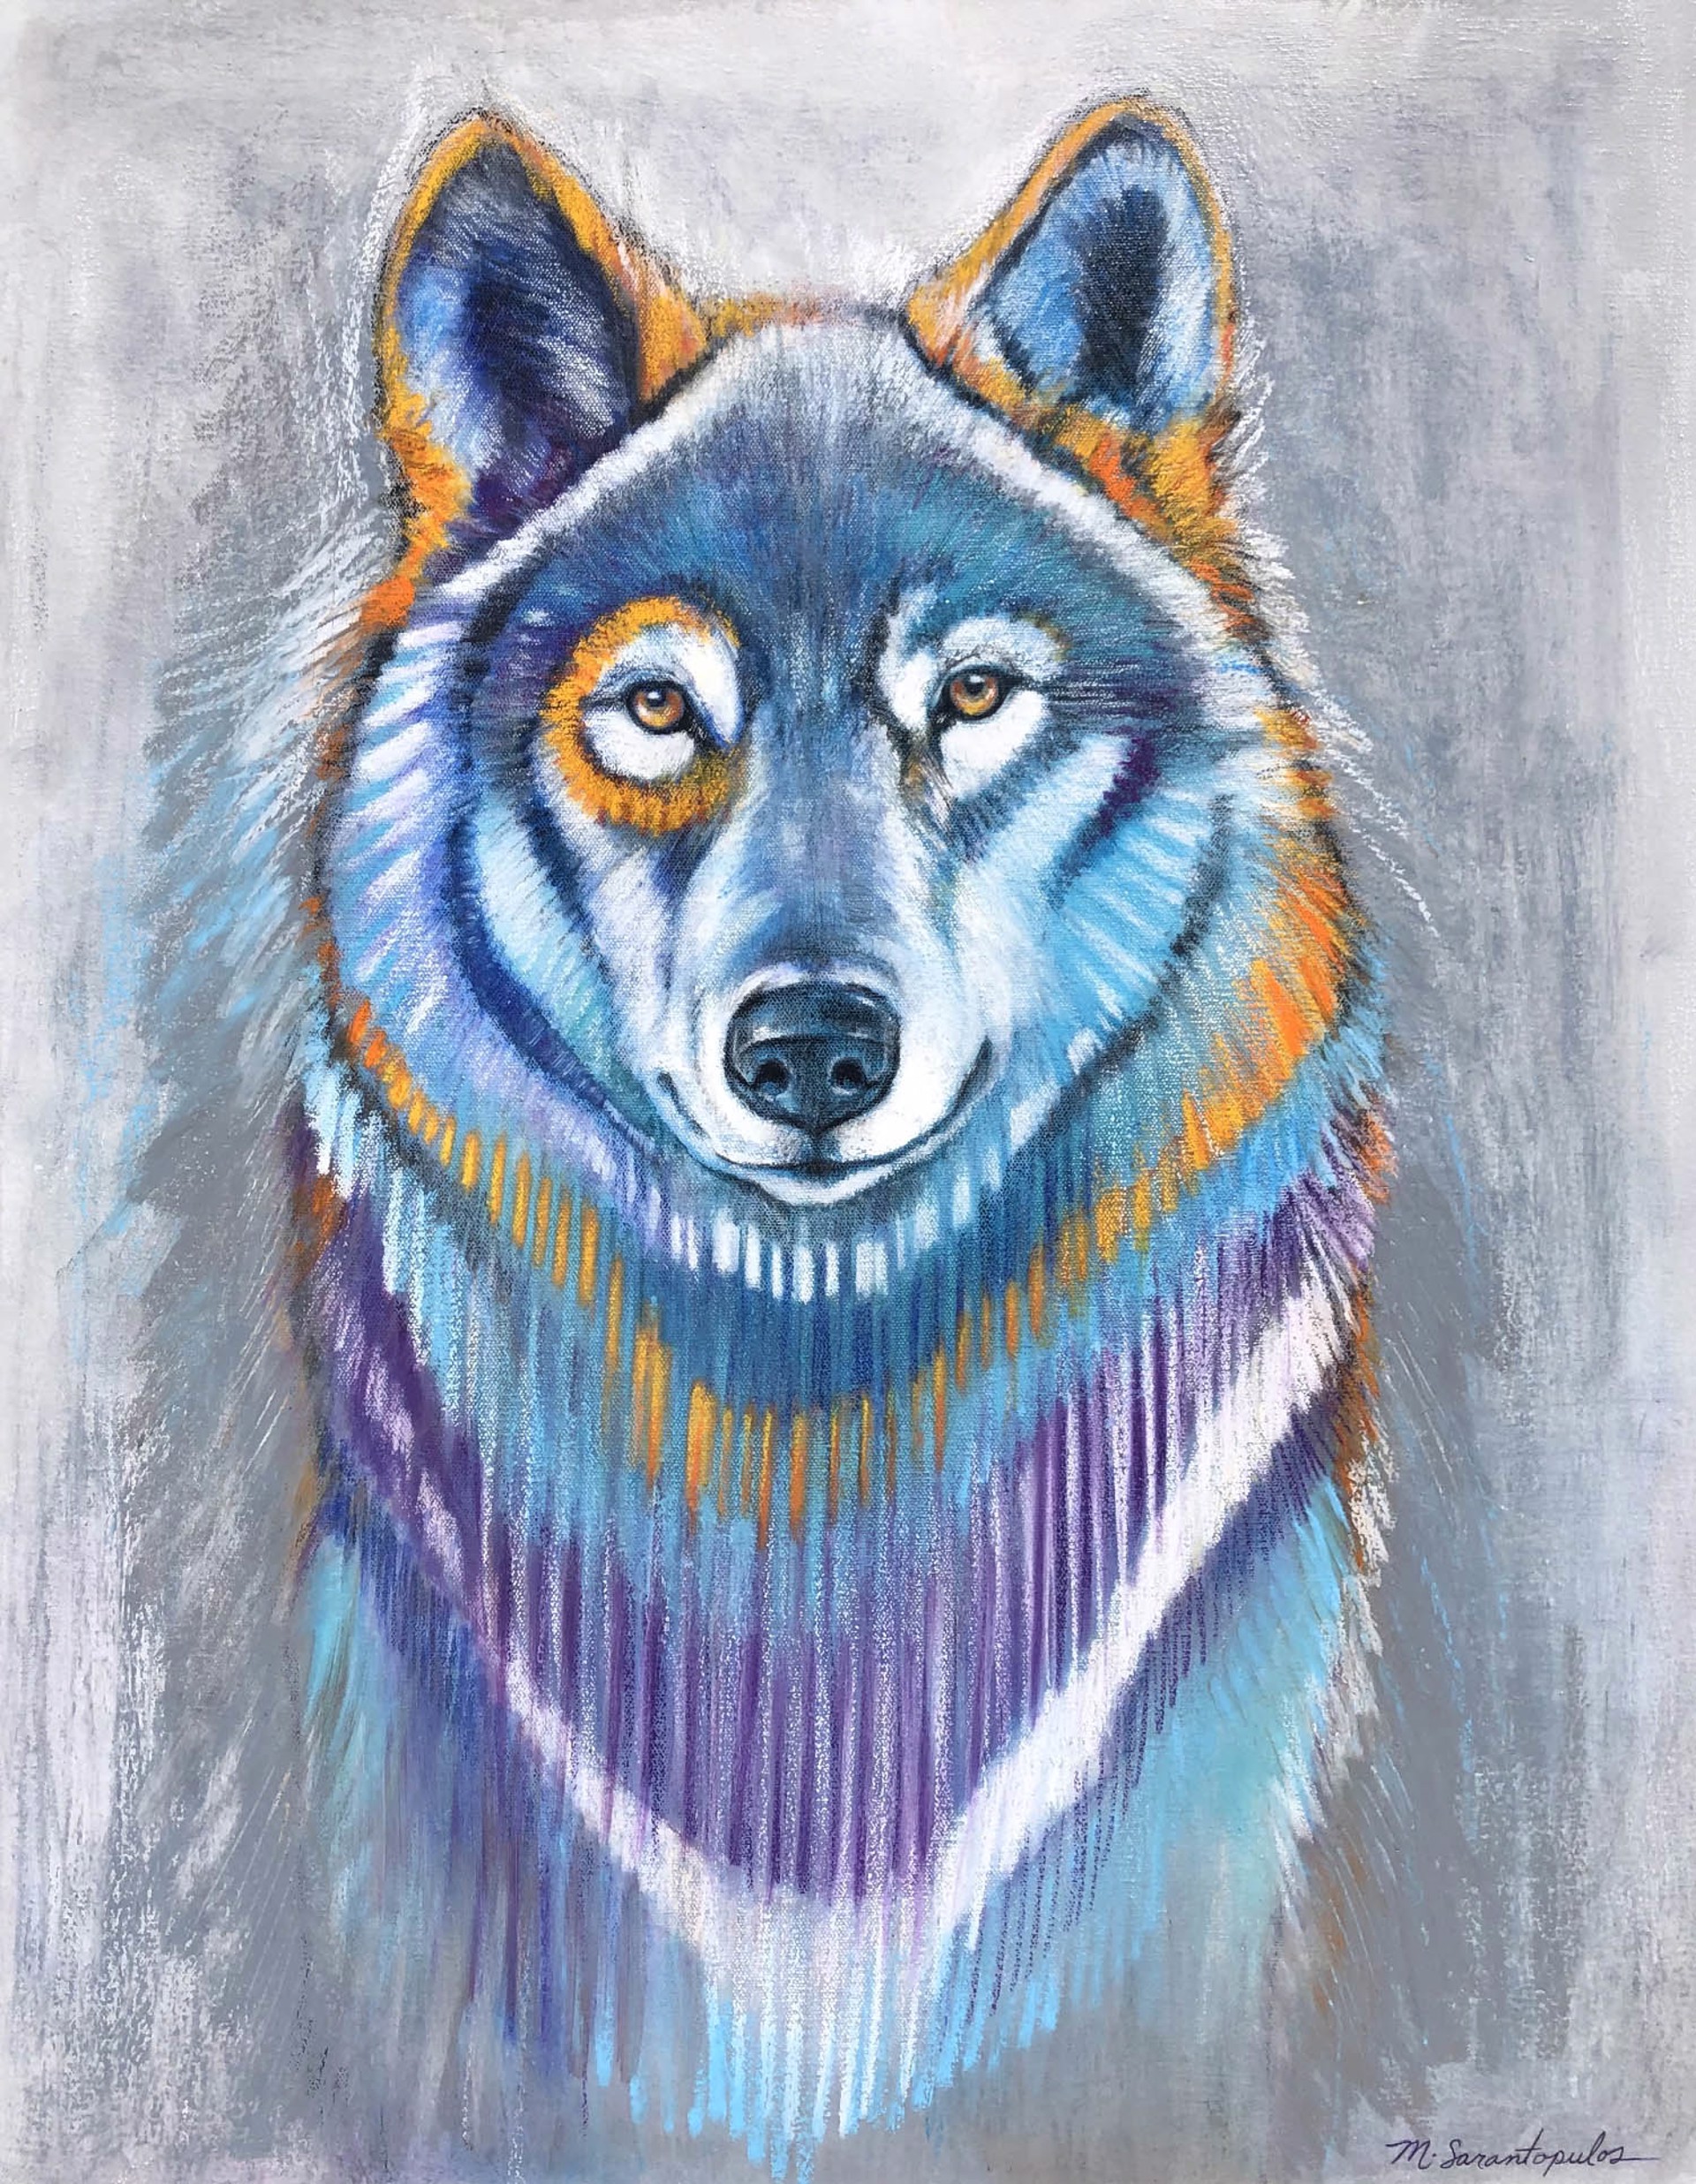 Original Mixed Media Painting Featuring A Wolf Portrait In Blues Over Gray Background